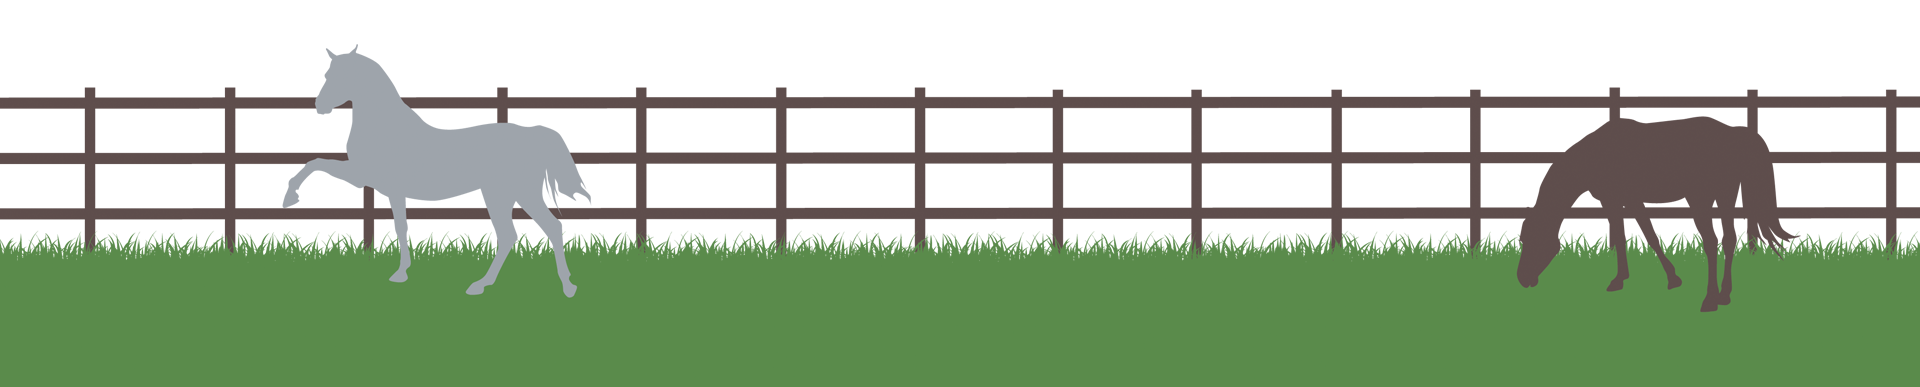 post and rail fencing for equestrian use